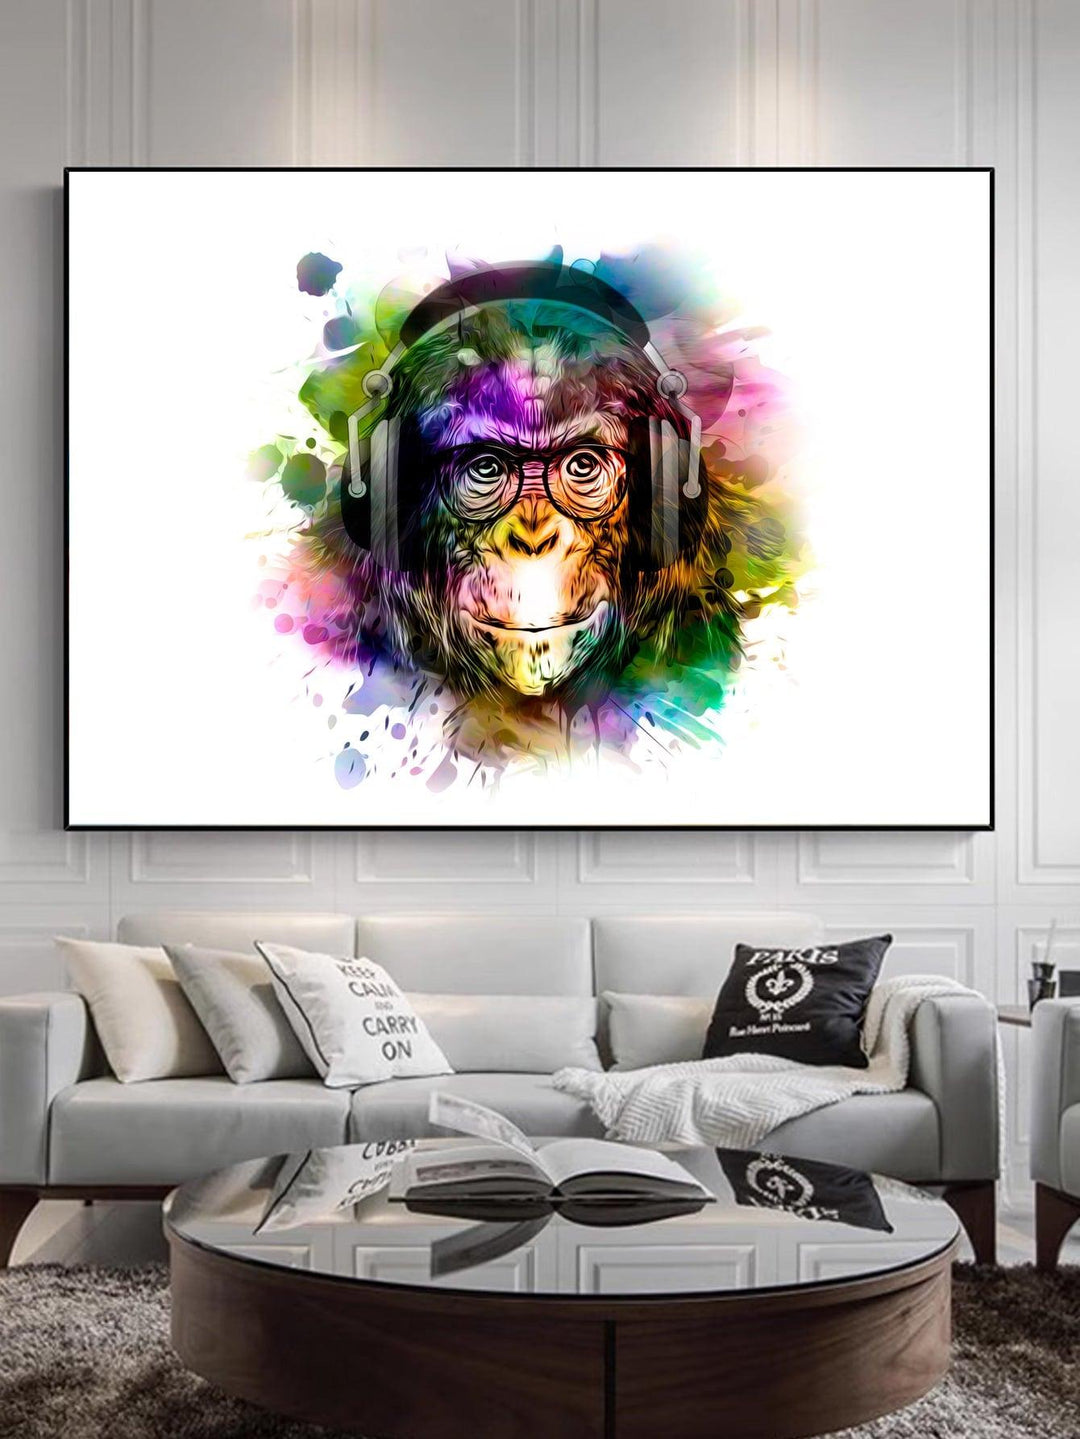 Orangutan Pattern Unframed Painting Animal Print Wall Hanging Prints Frame Not Include For Home Decor - Brand My Case